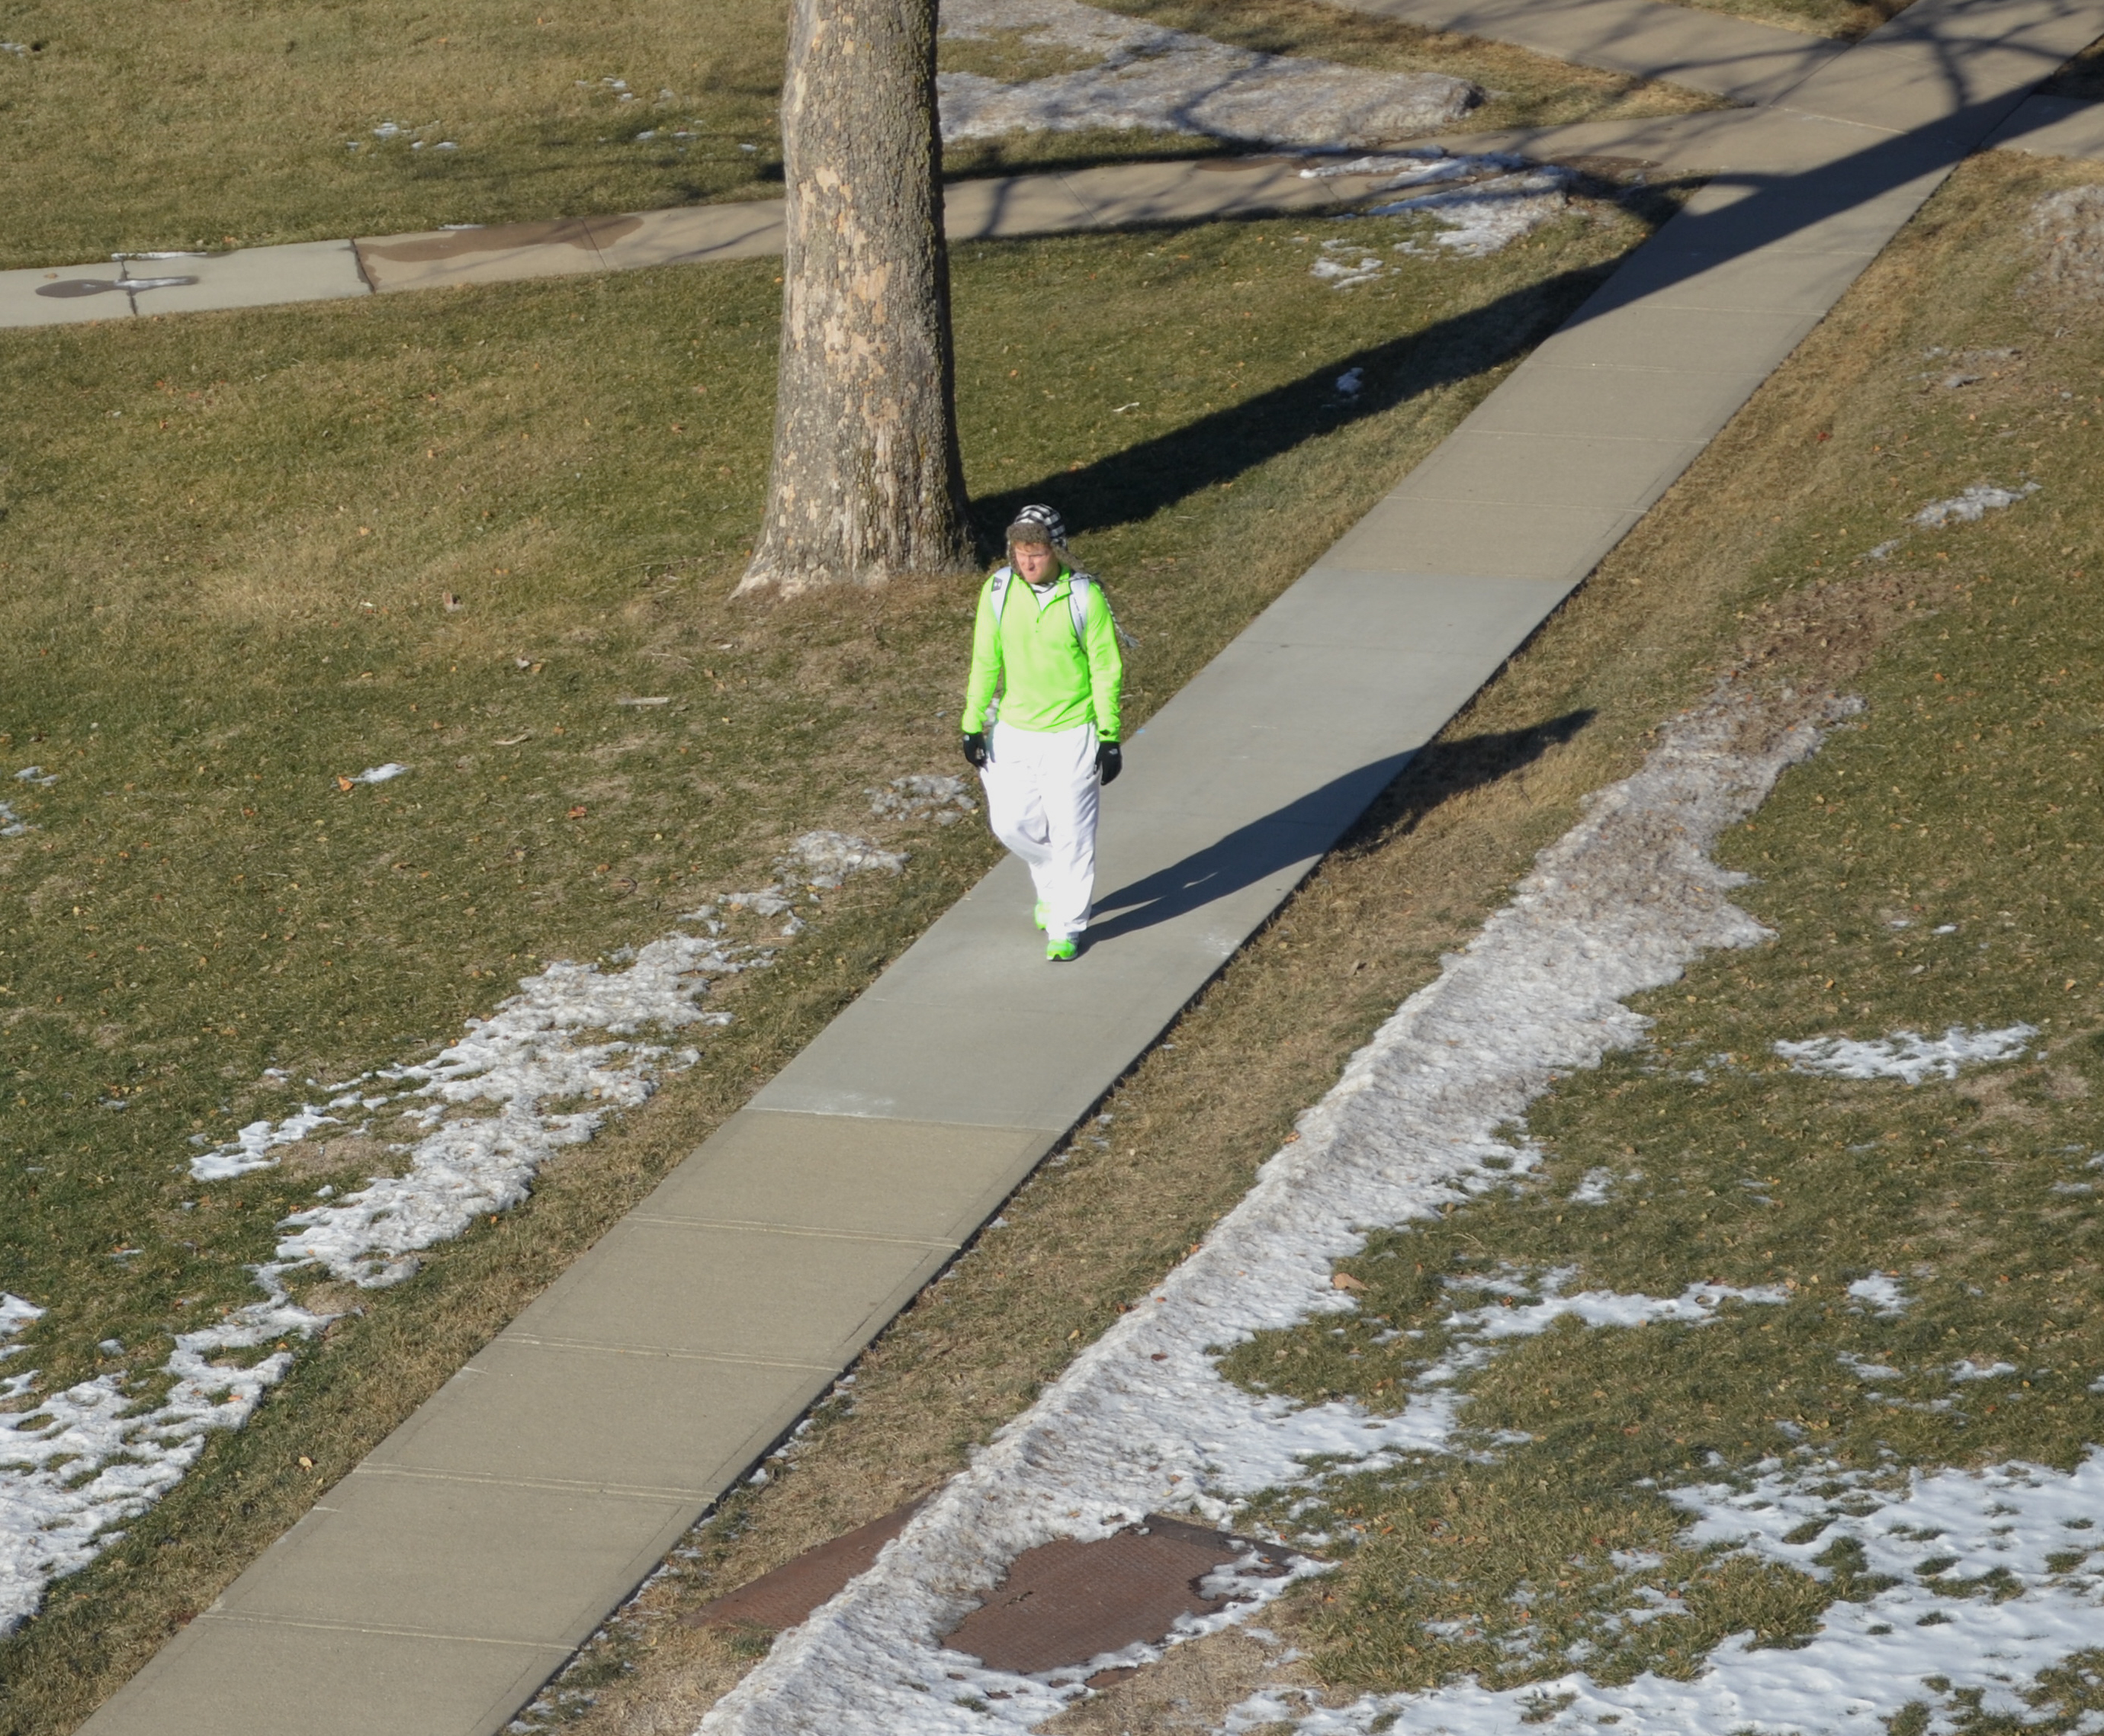 A Morningside student struts across campus in his neon jacket and shoes Tuesday.